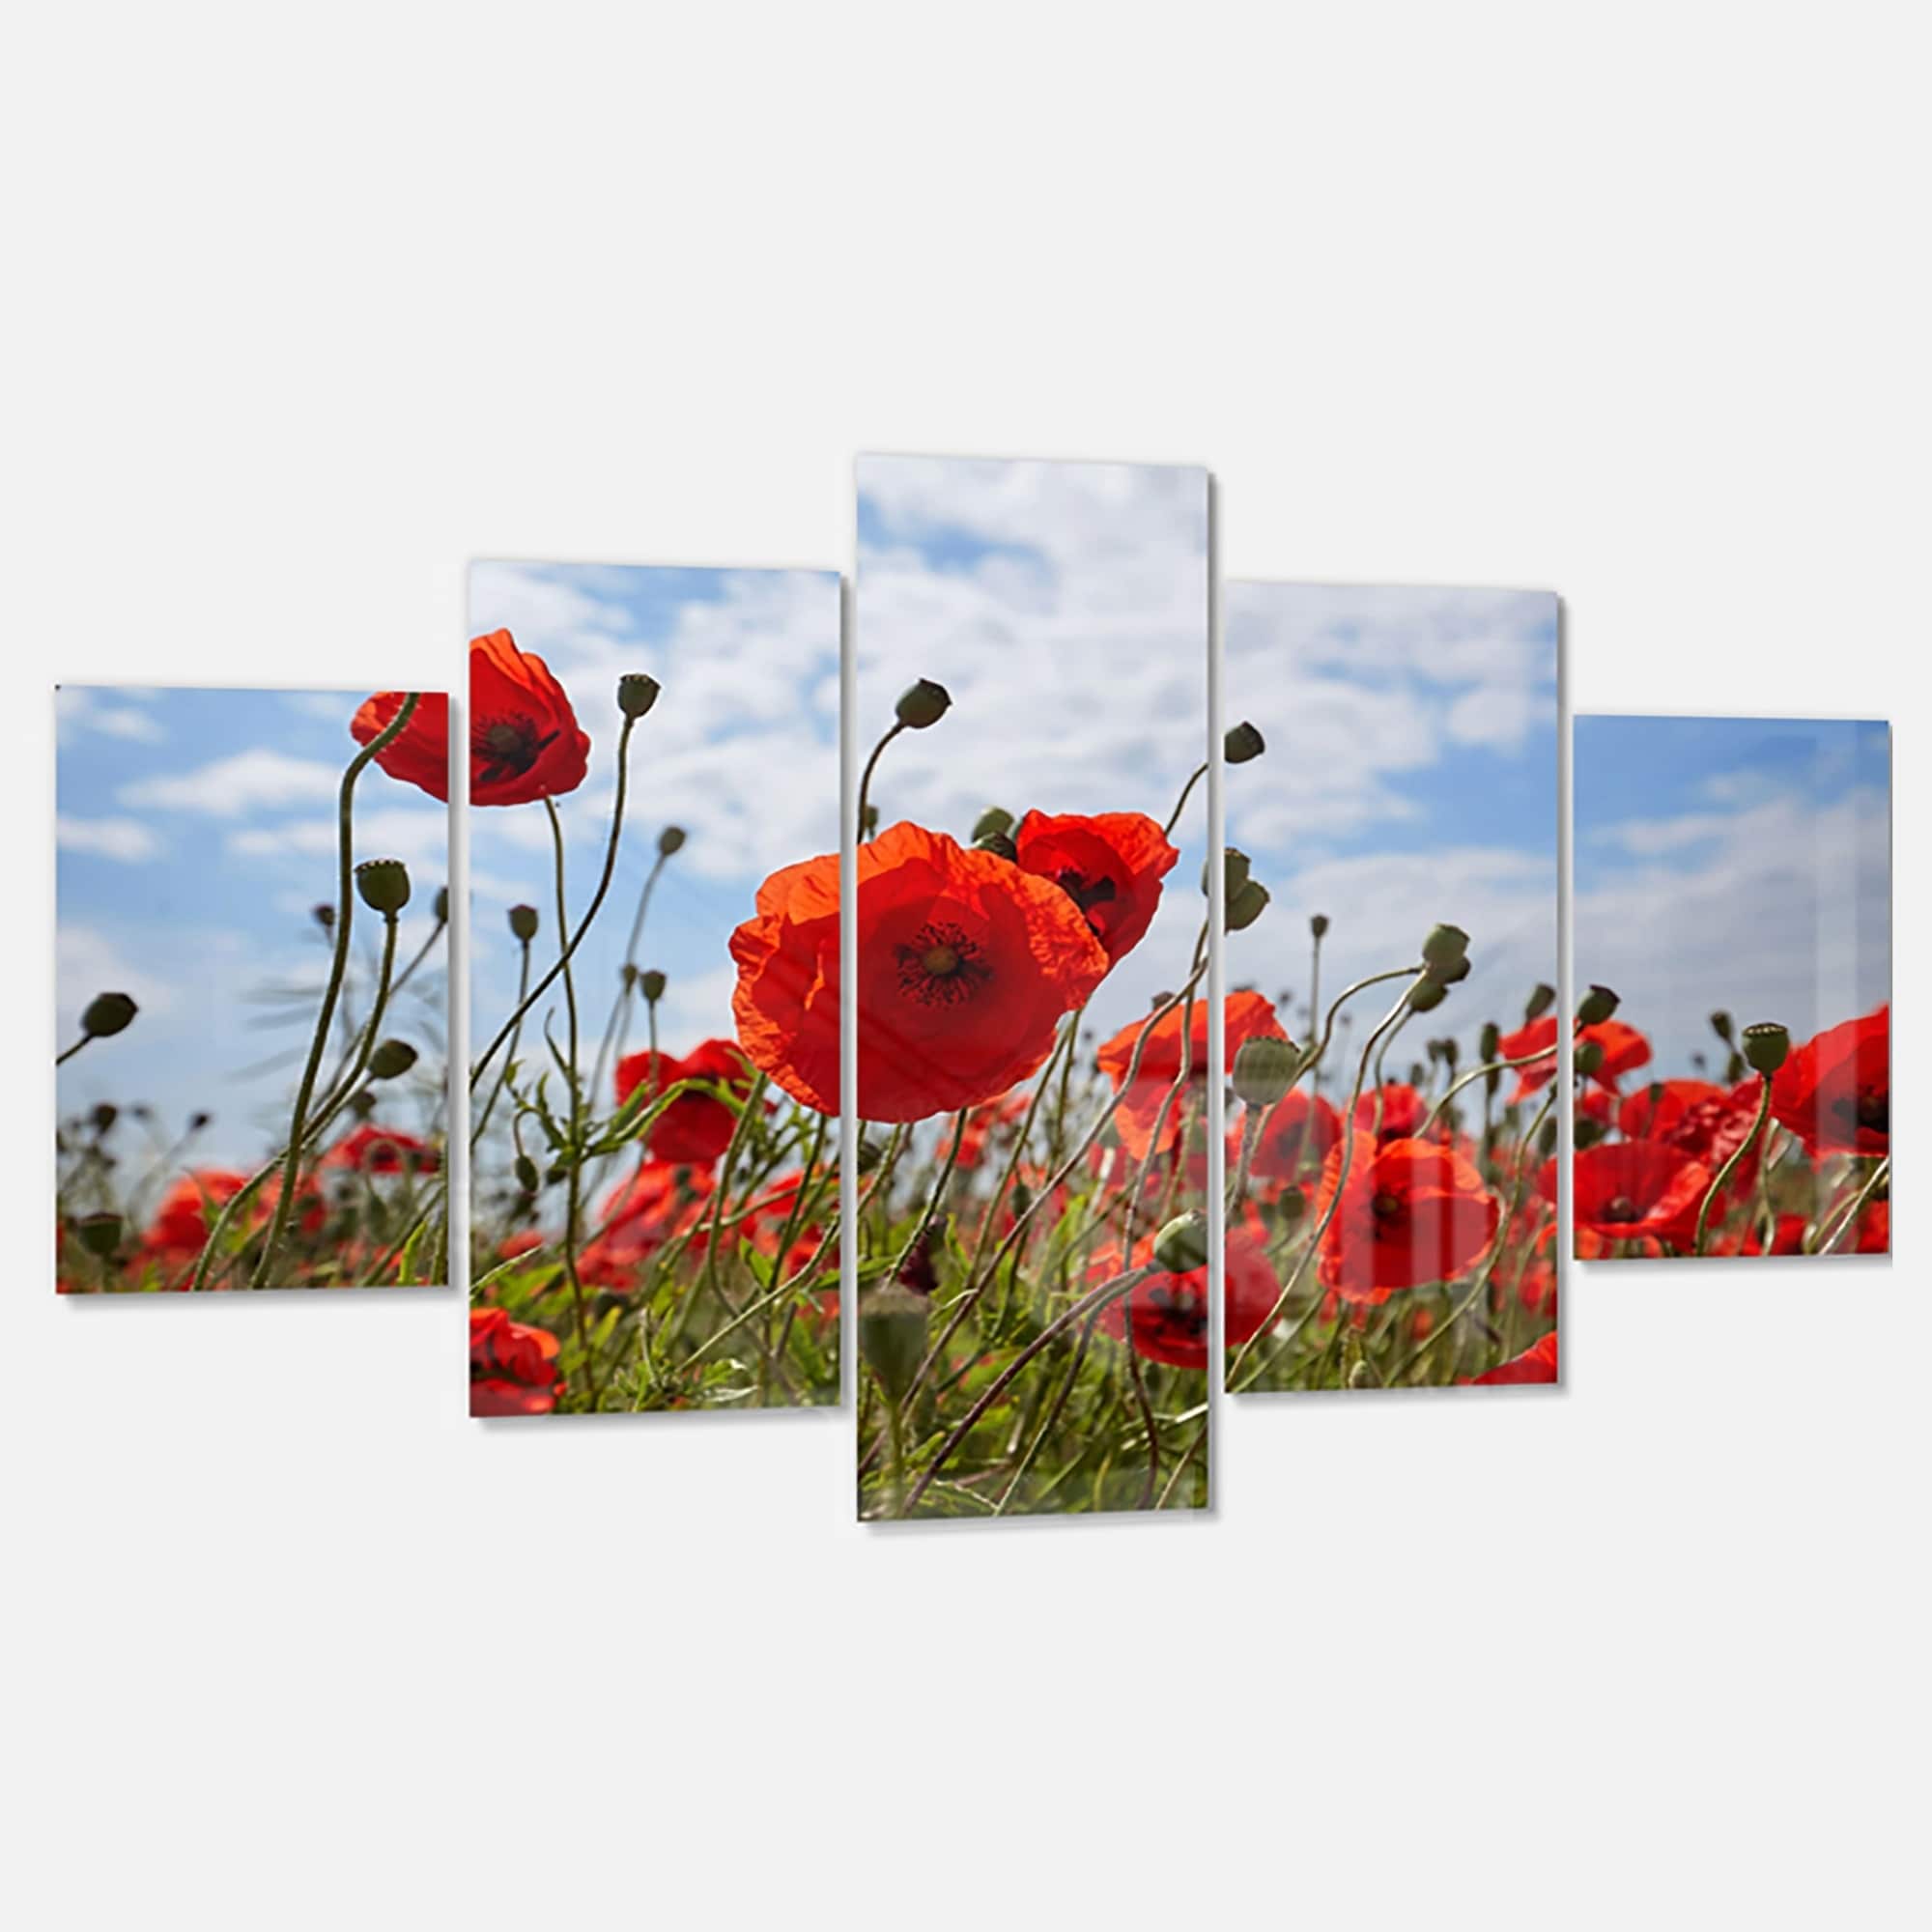 Poppy Floral Flowers Red Picture CANVAS WALL ART Portrait Print 